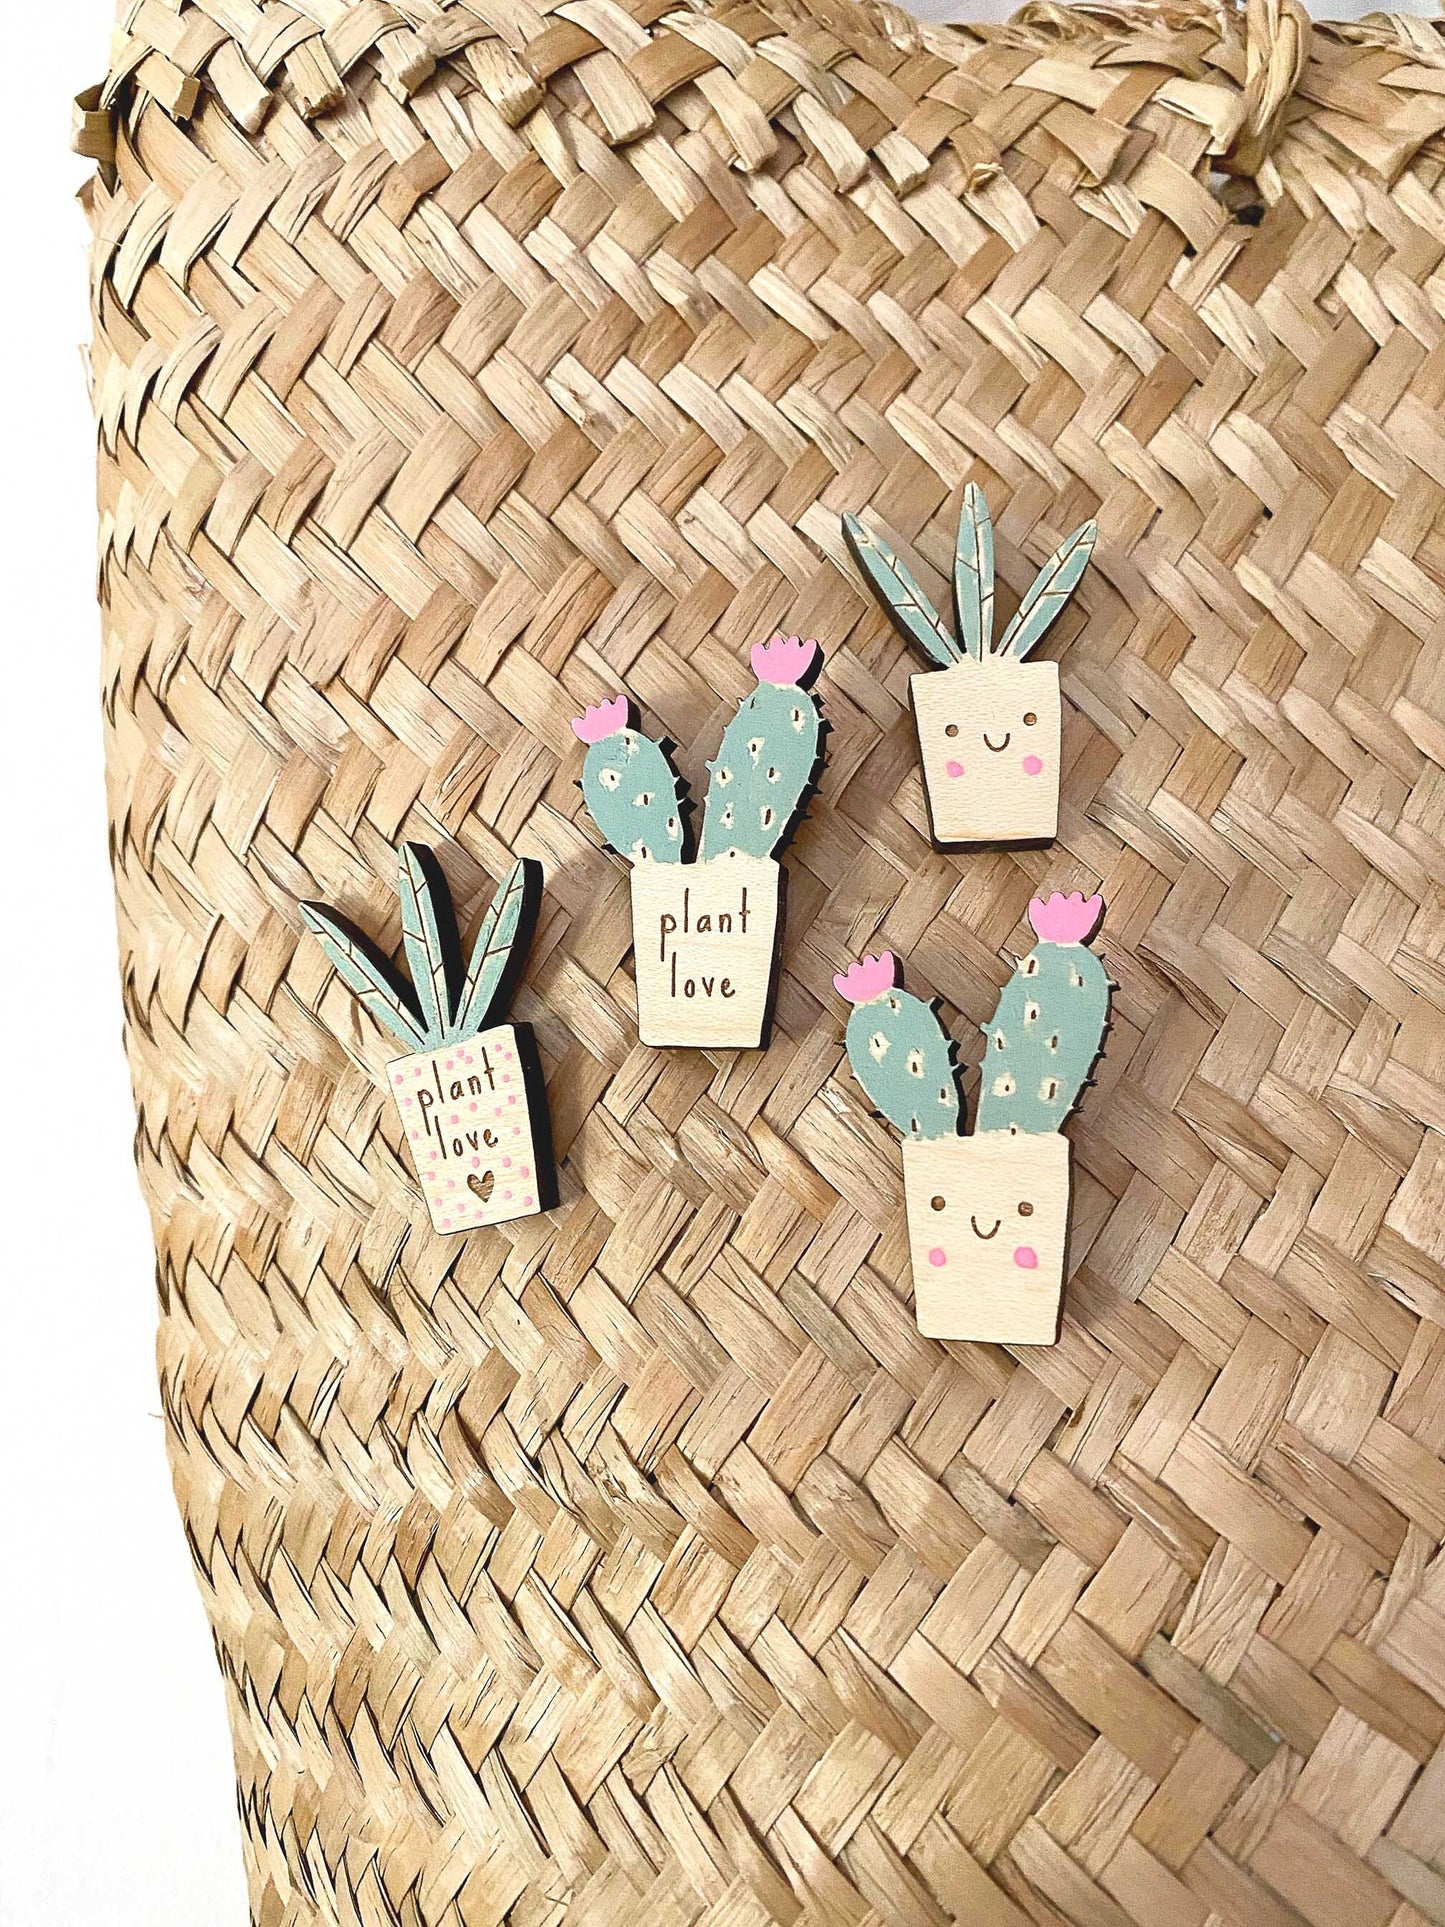 Hand-painted plant love cactus wooden pin badge